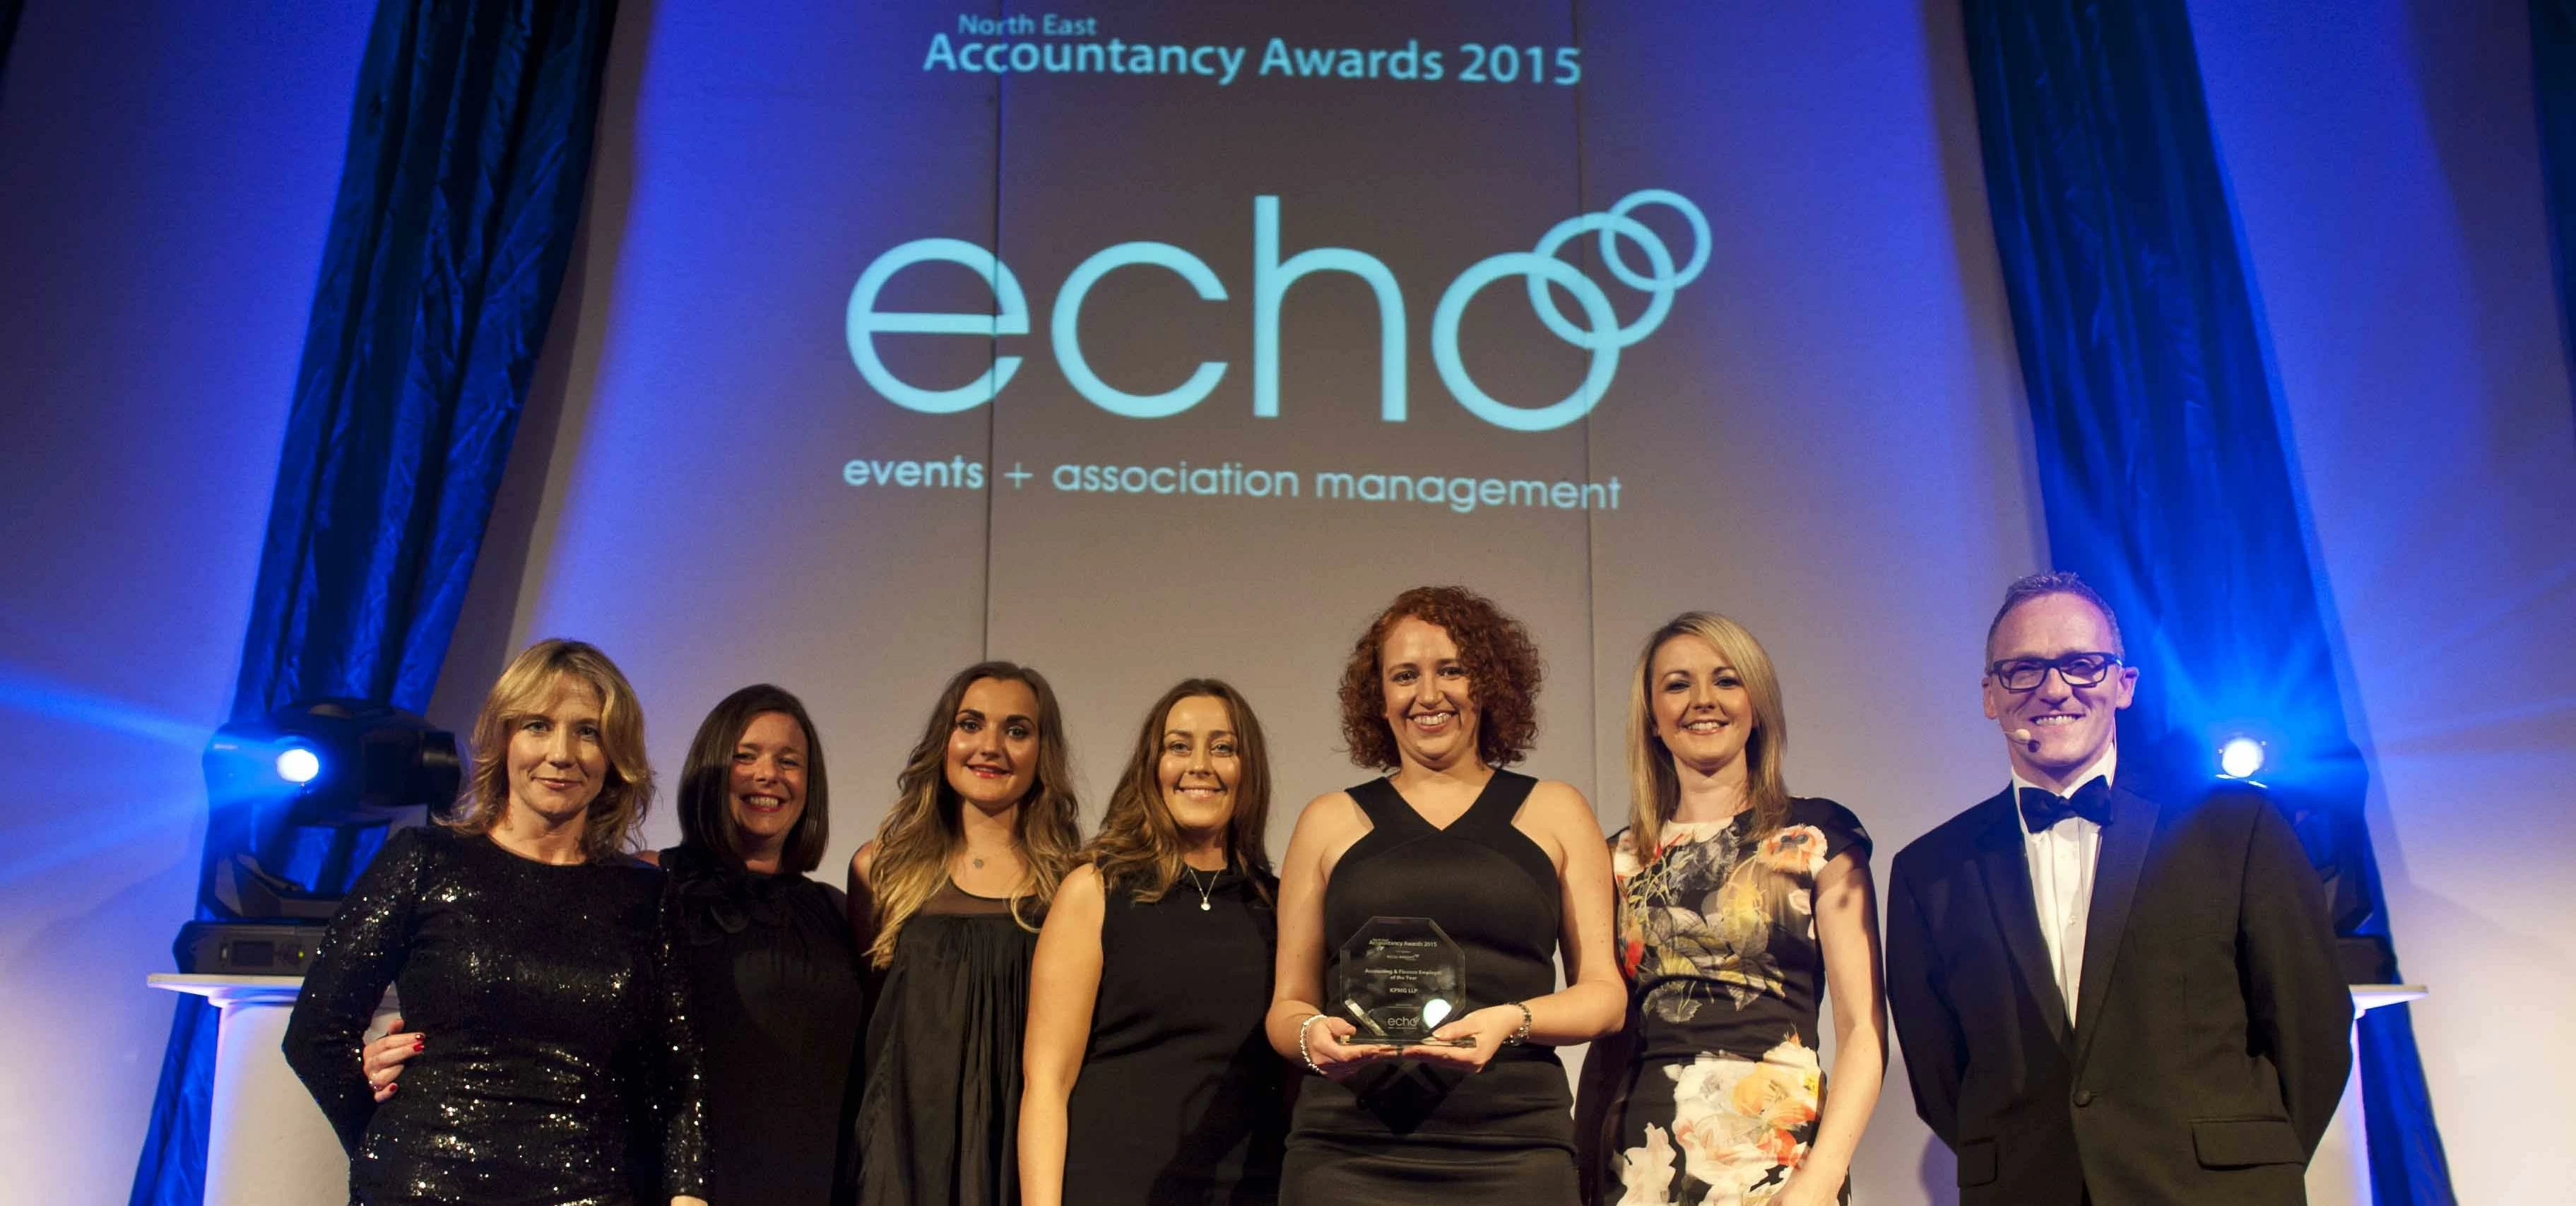 l-r Fiona Fletcher of Echo Events, the KPMG LLP team with the Employer of the Year Award and Alfie J